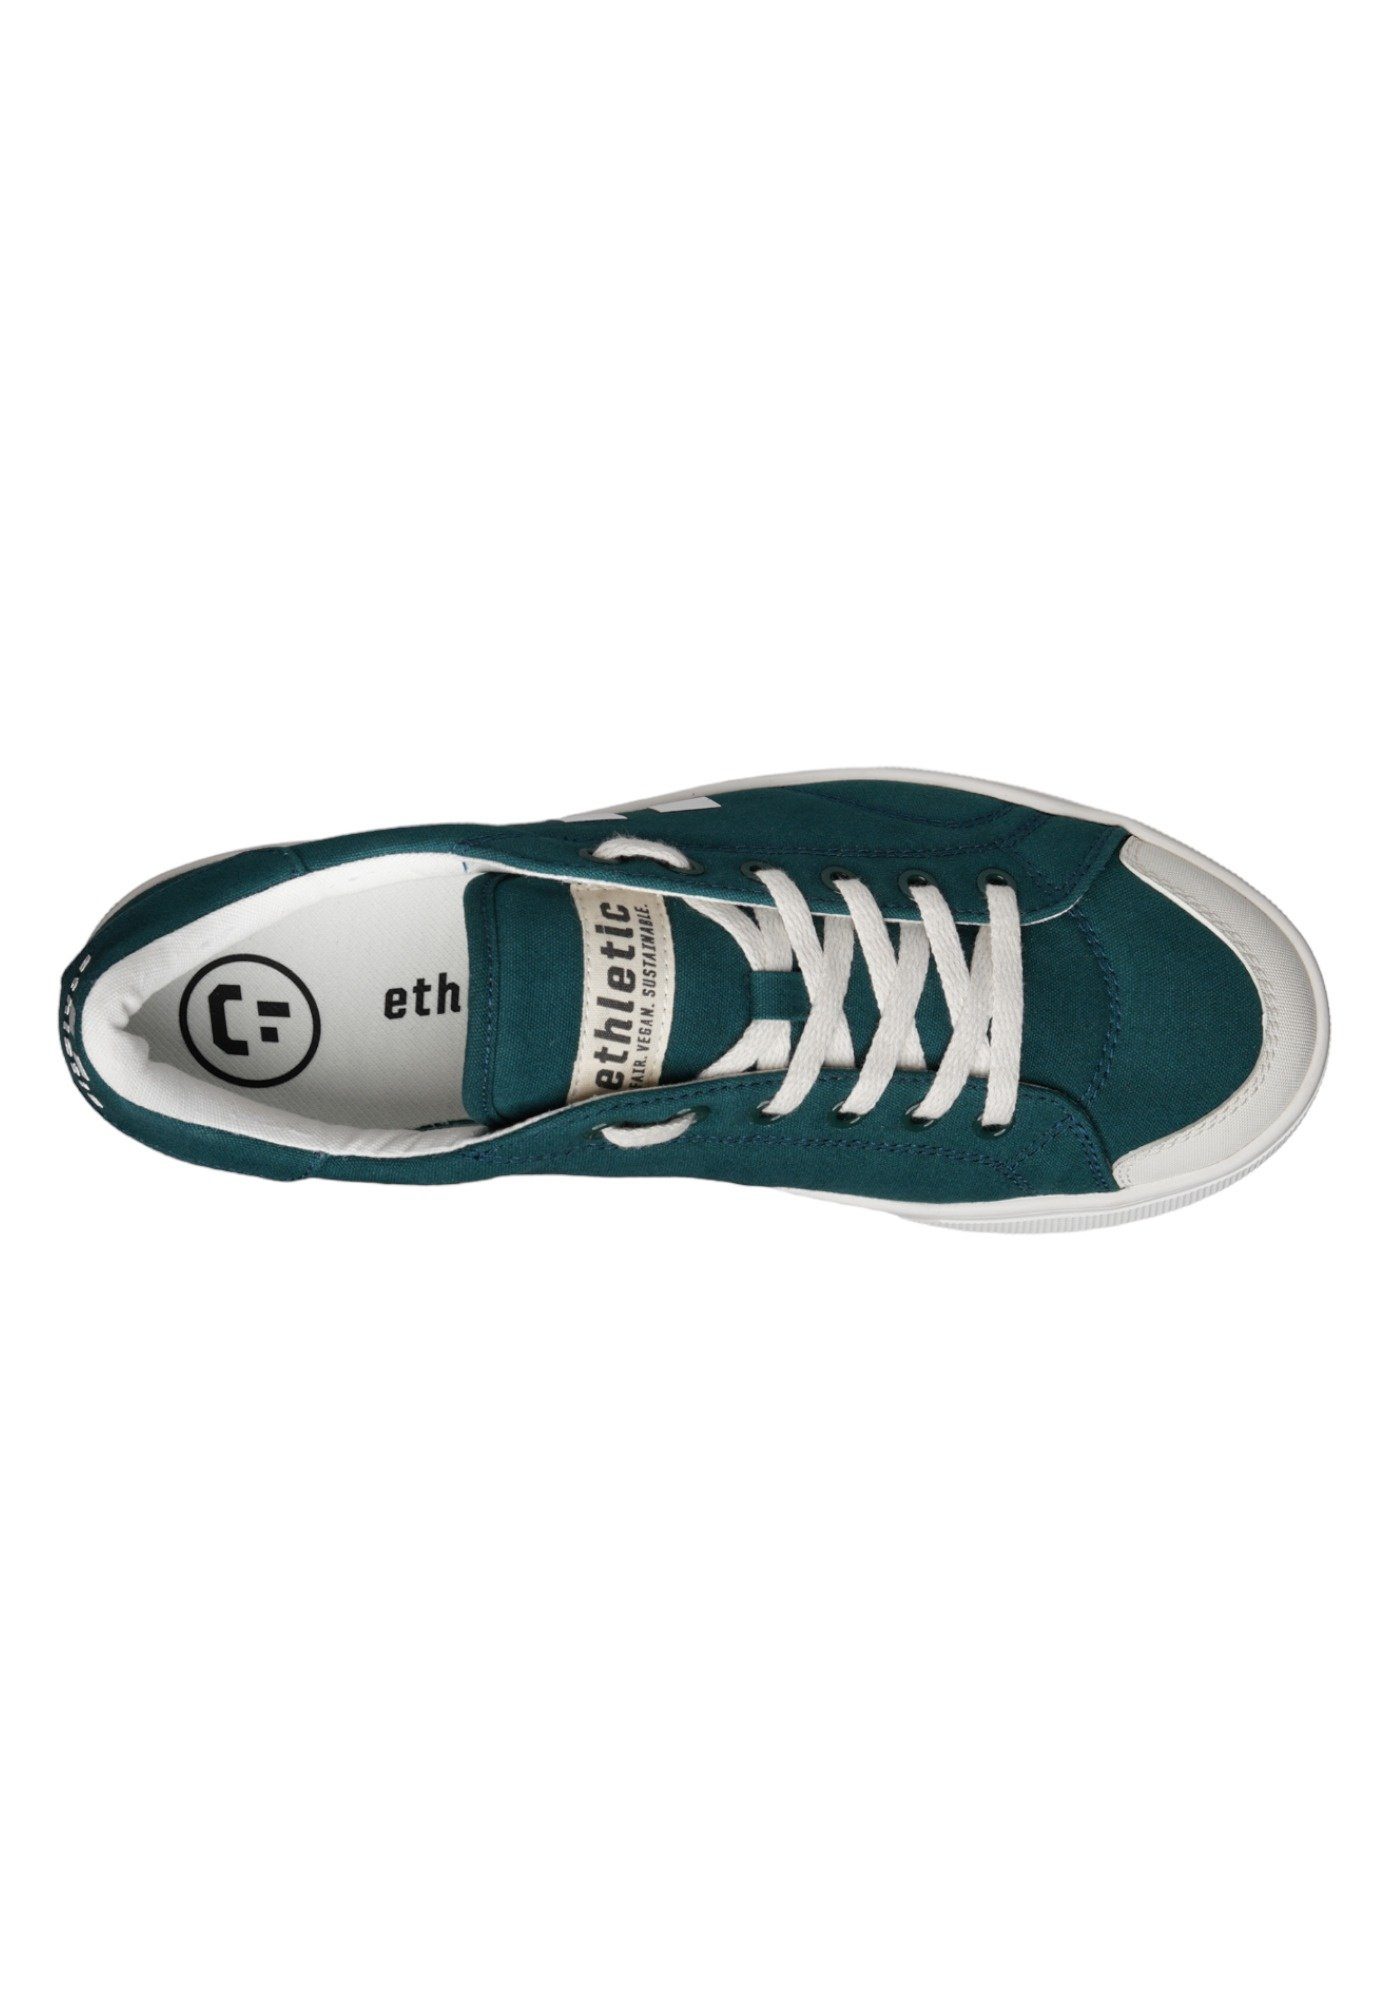 Fir - White Active Just Produkt Sneaker ETHLETIC Green Cut Fairtrade Lo Tree